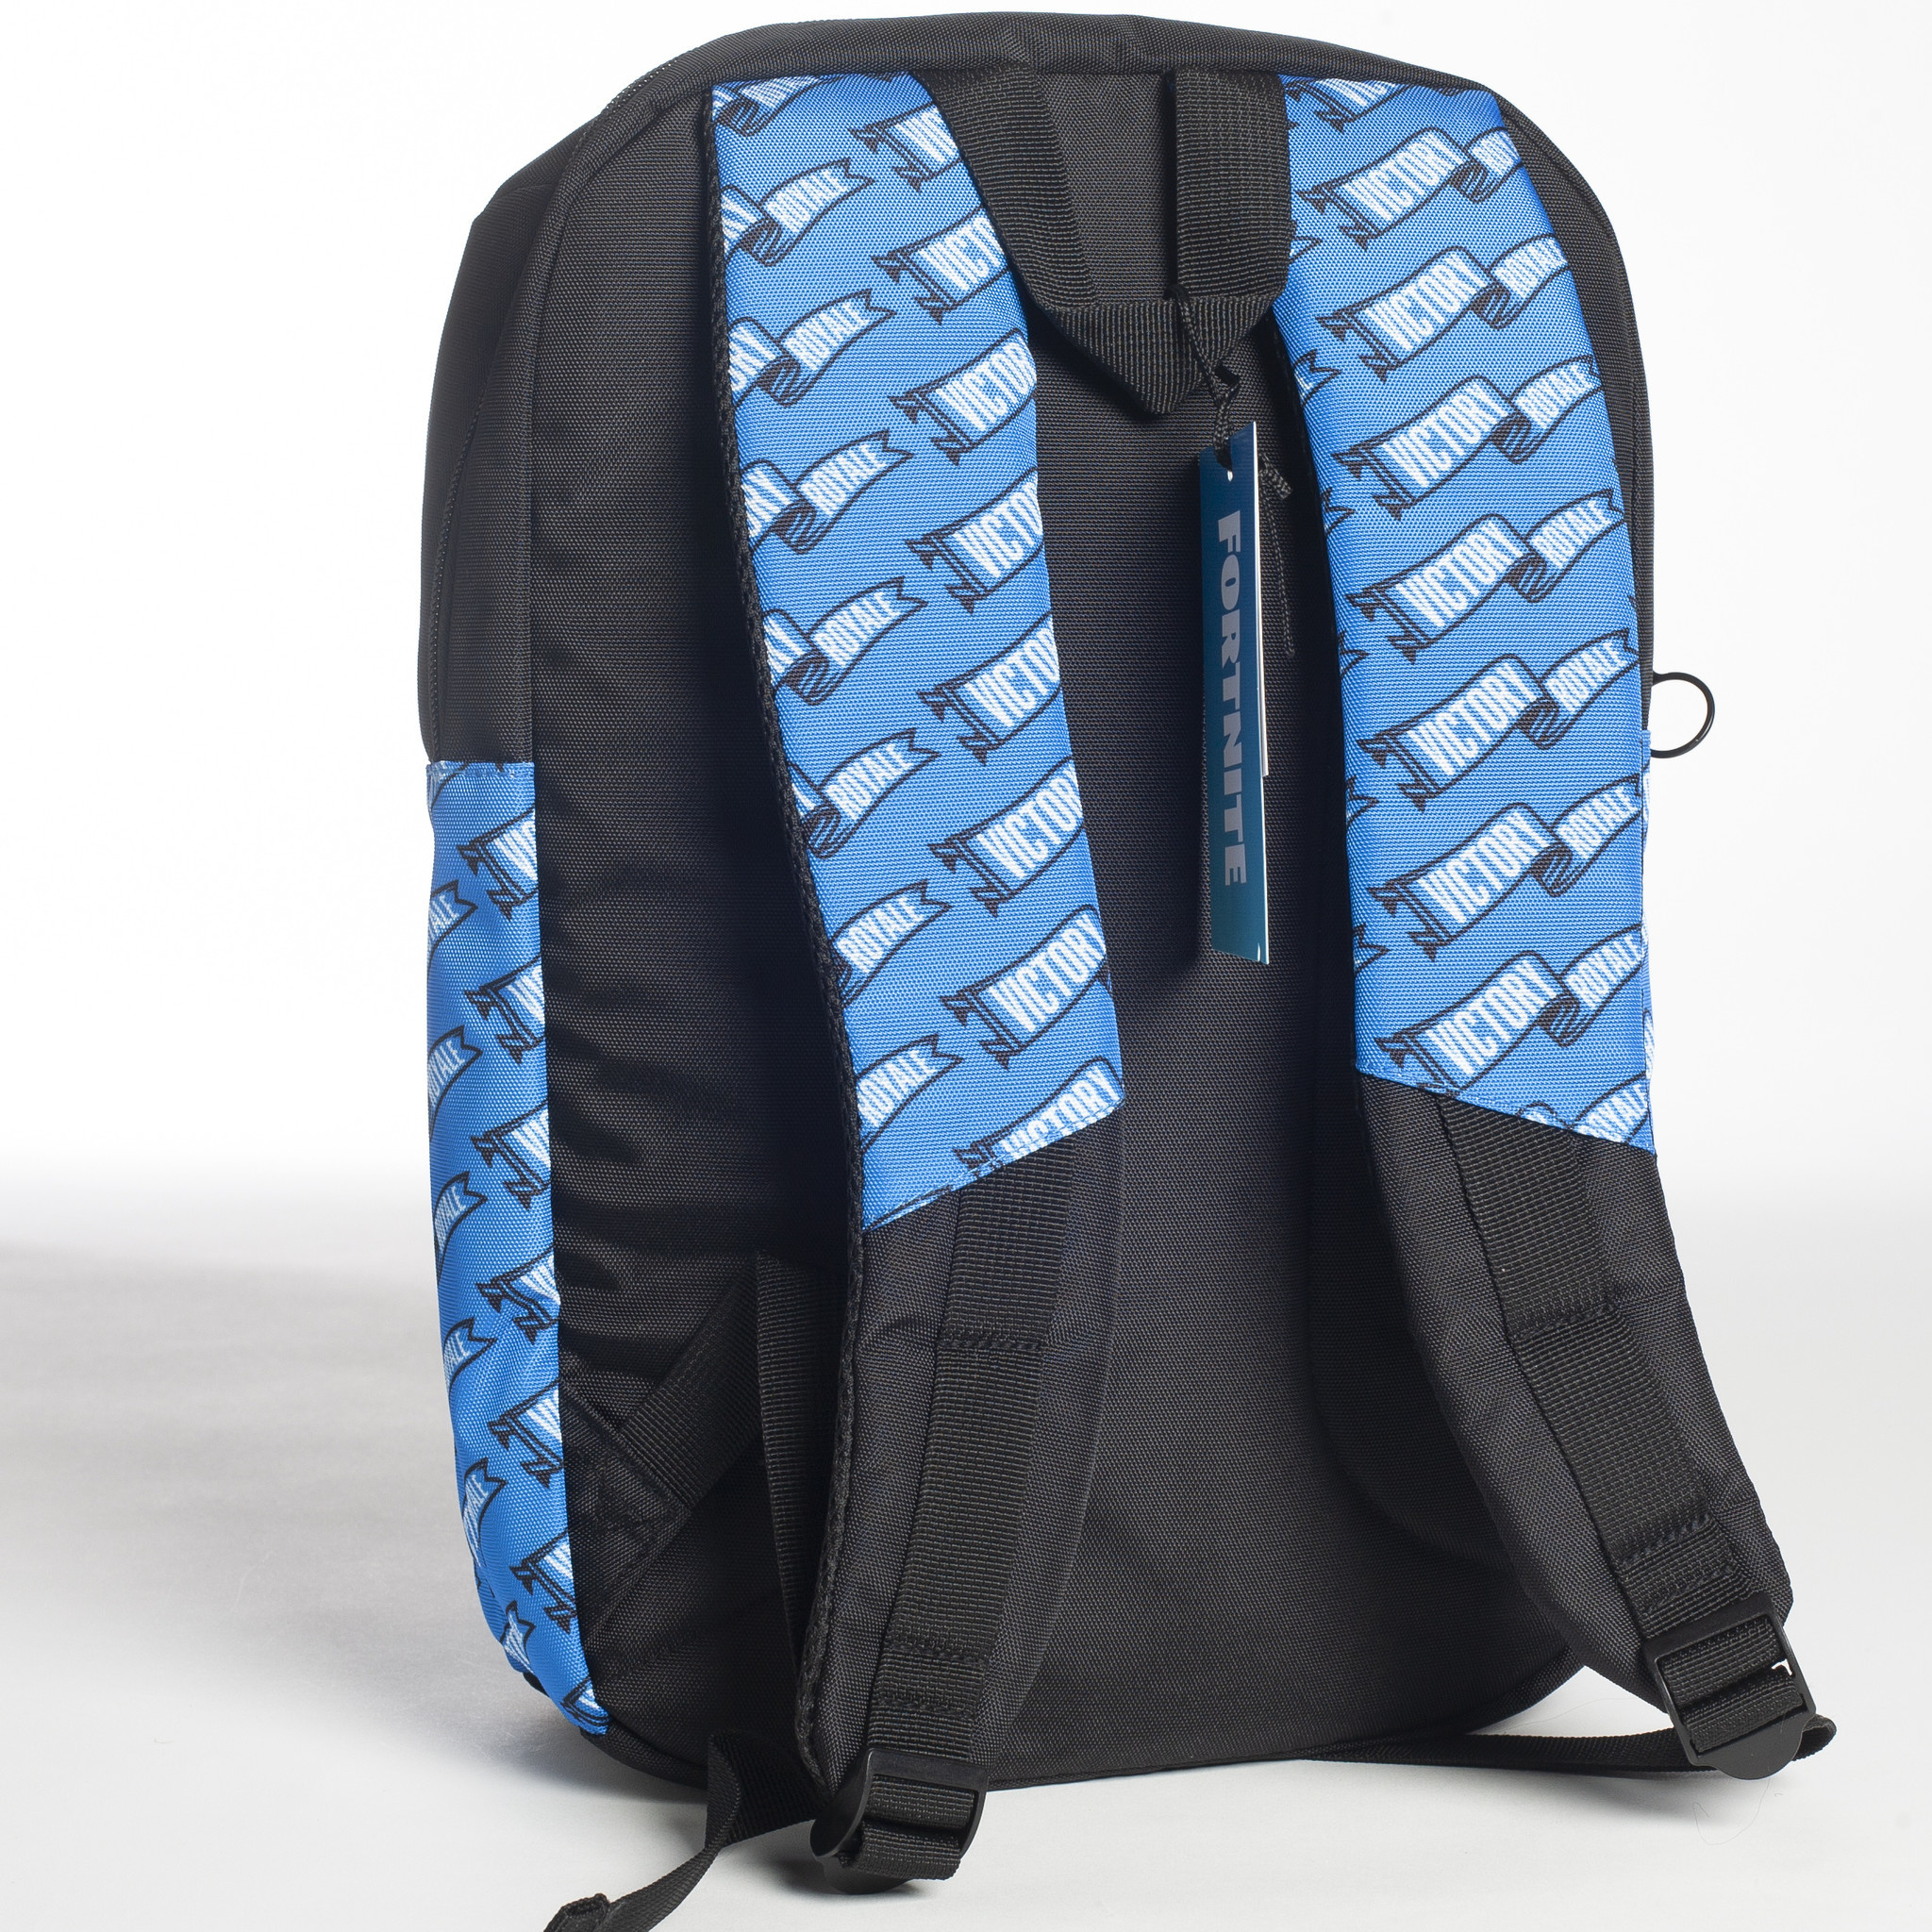 Fortnite Backpack Victory Royale - 40 x 28 x 11 cm - Polyester